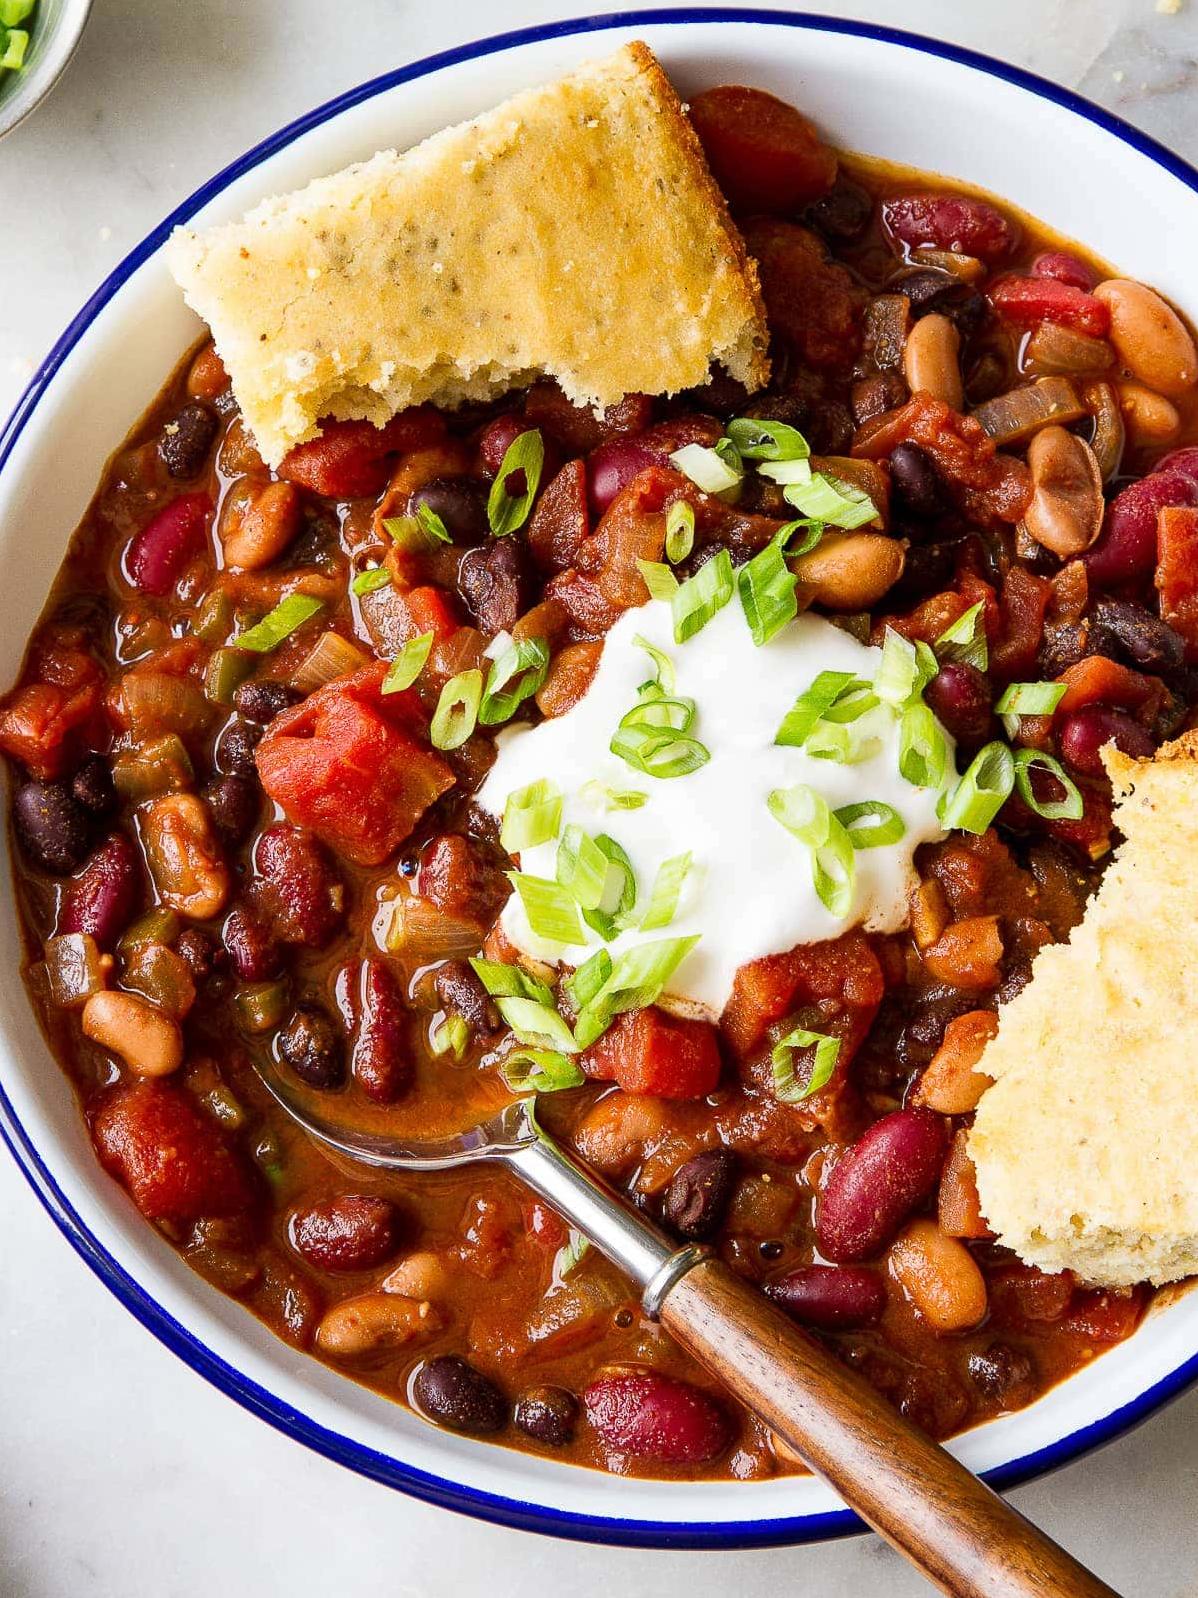  Packed with flavor from three types of beans and a medley of spices.